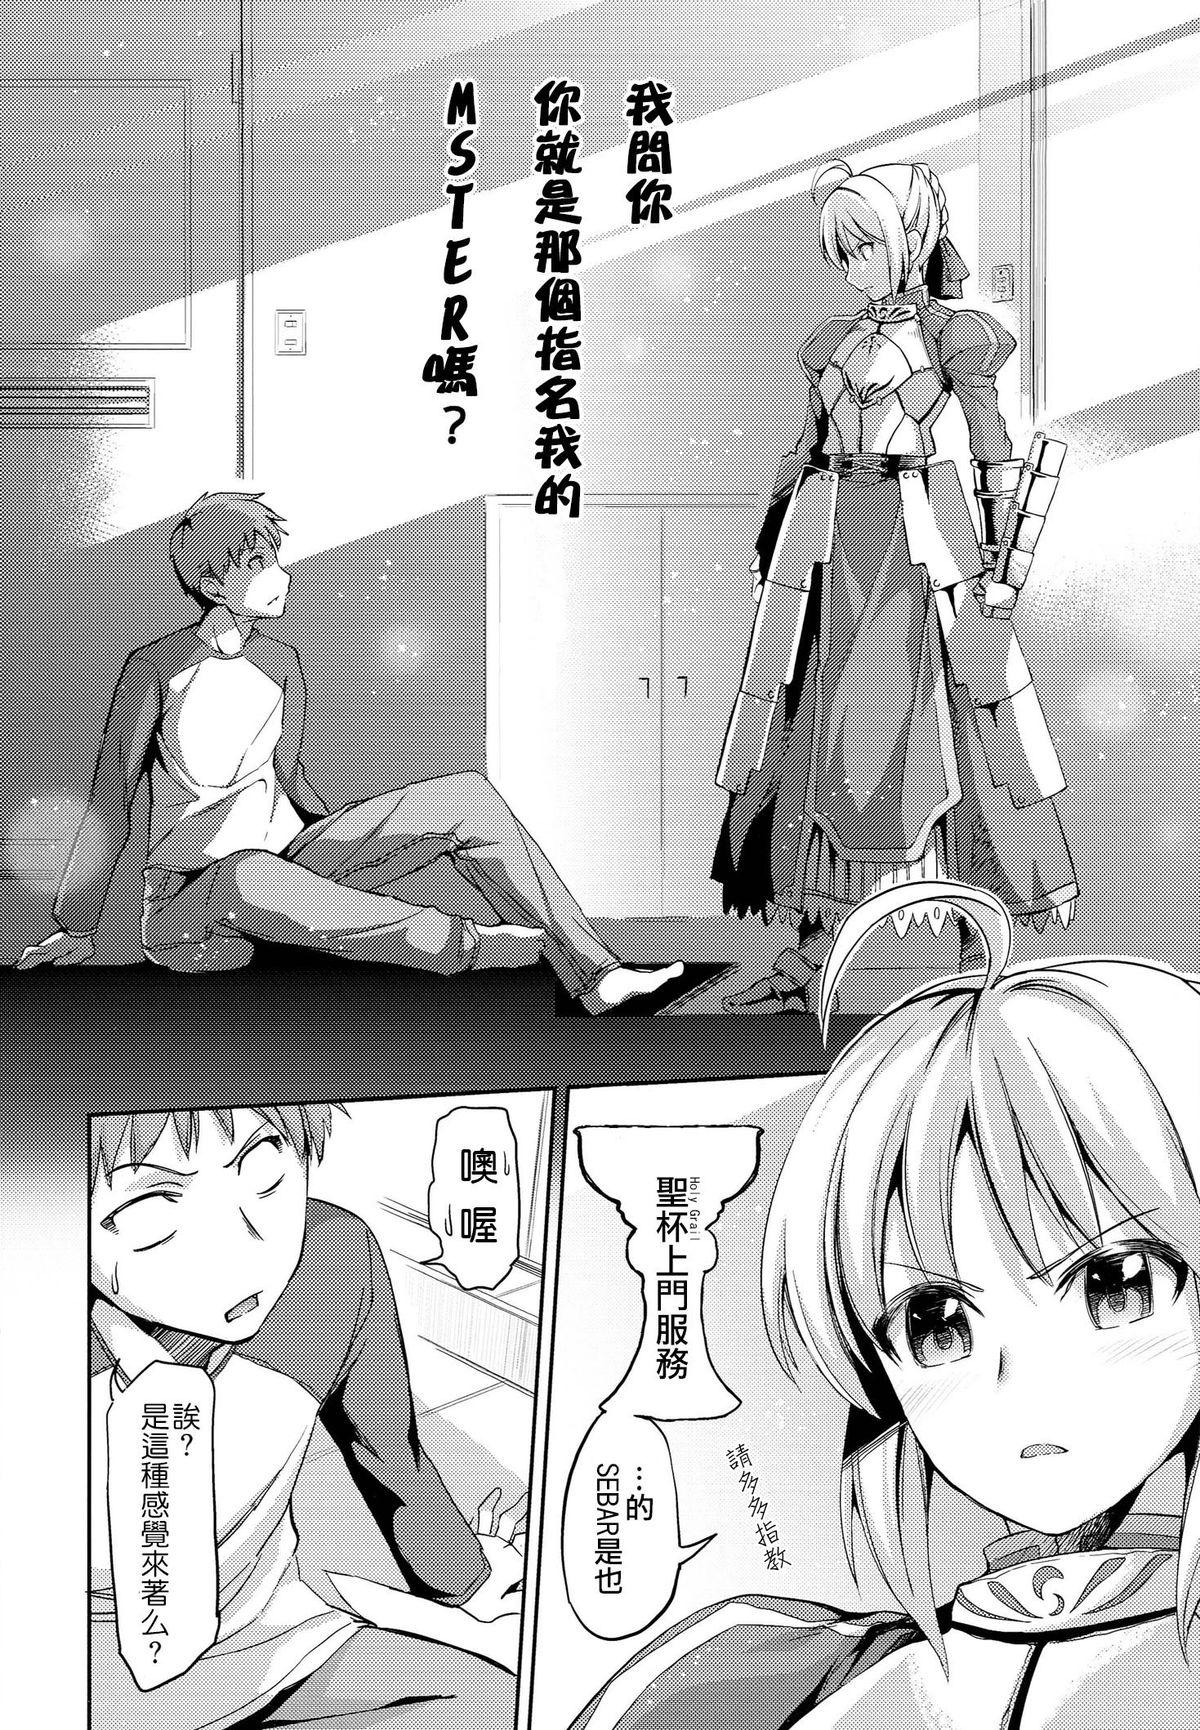 Car Fate delihell night - Fate stay night Panties - Page 5